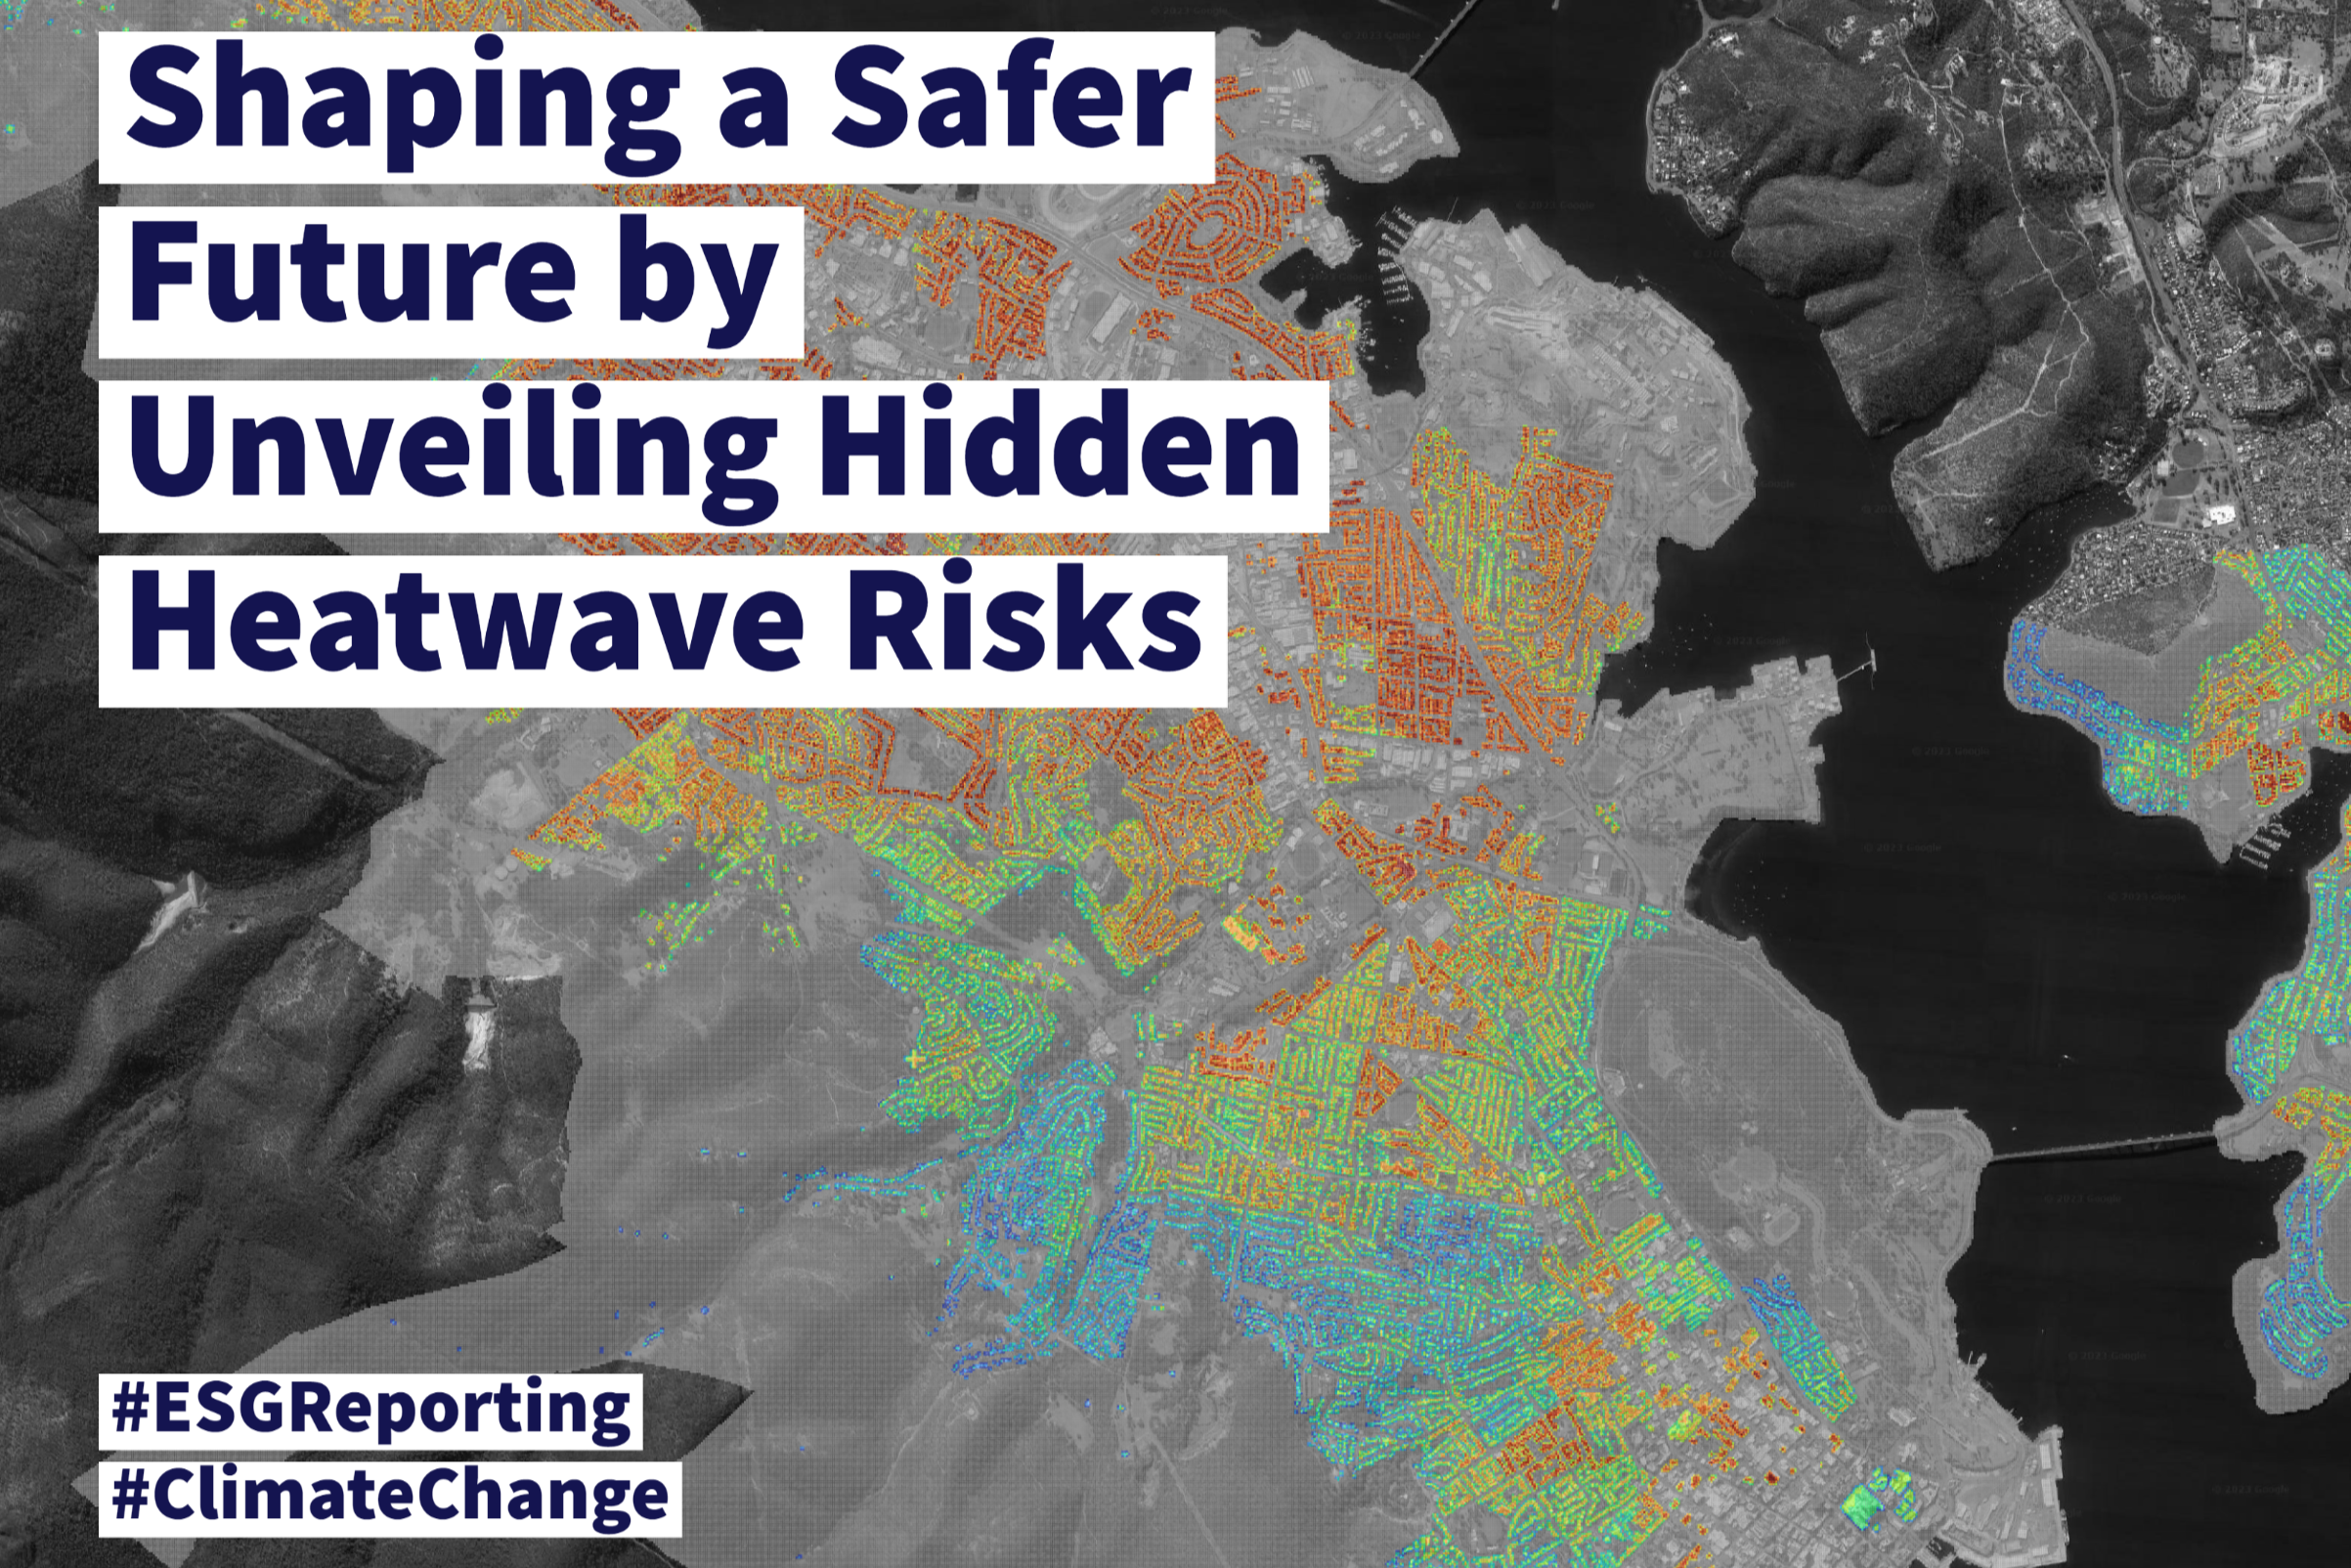 heat-map-with-text-reading-"shaping-a-safer-future-unveiling-hidden-heatwave-risks"